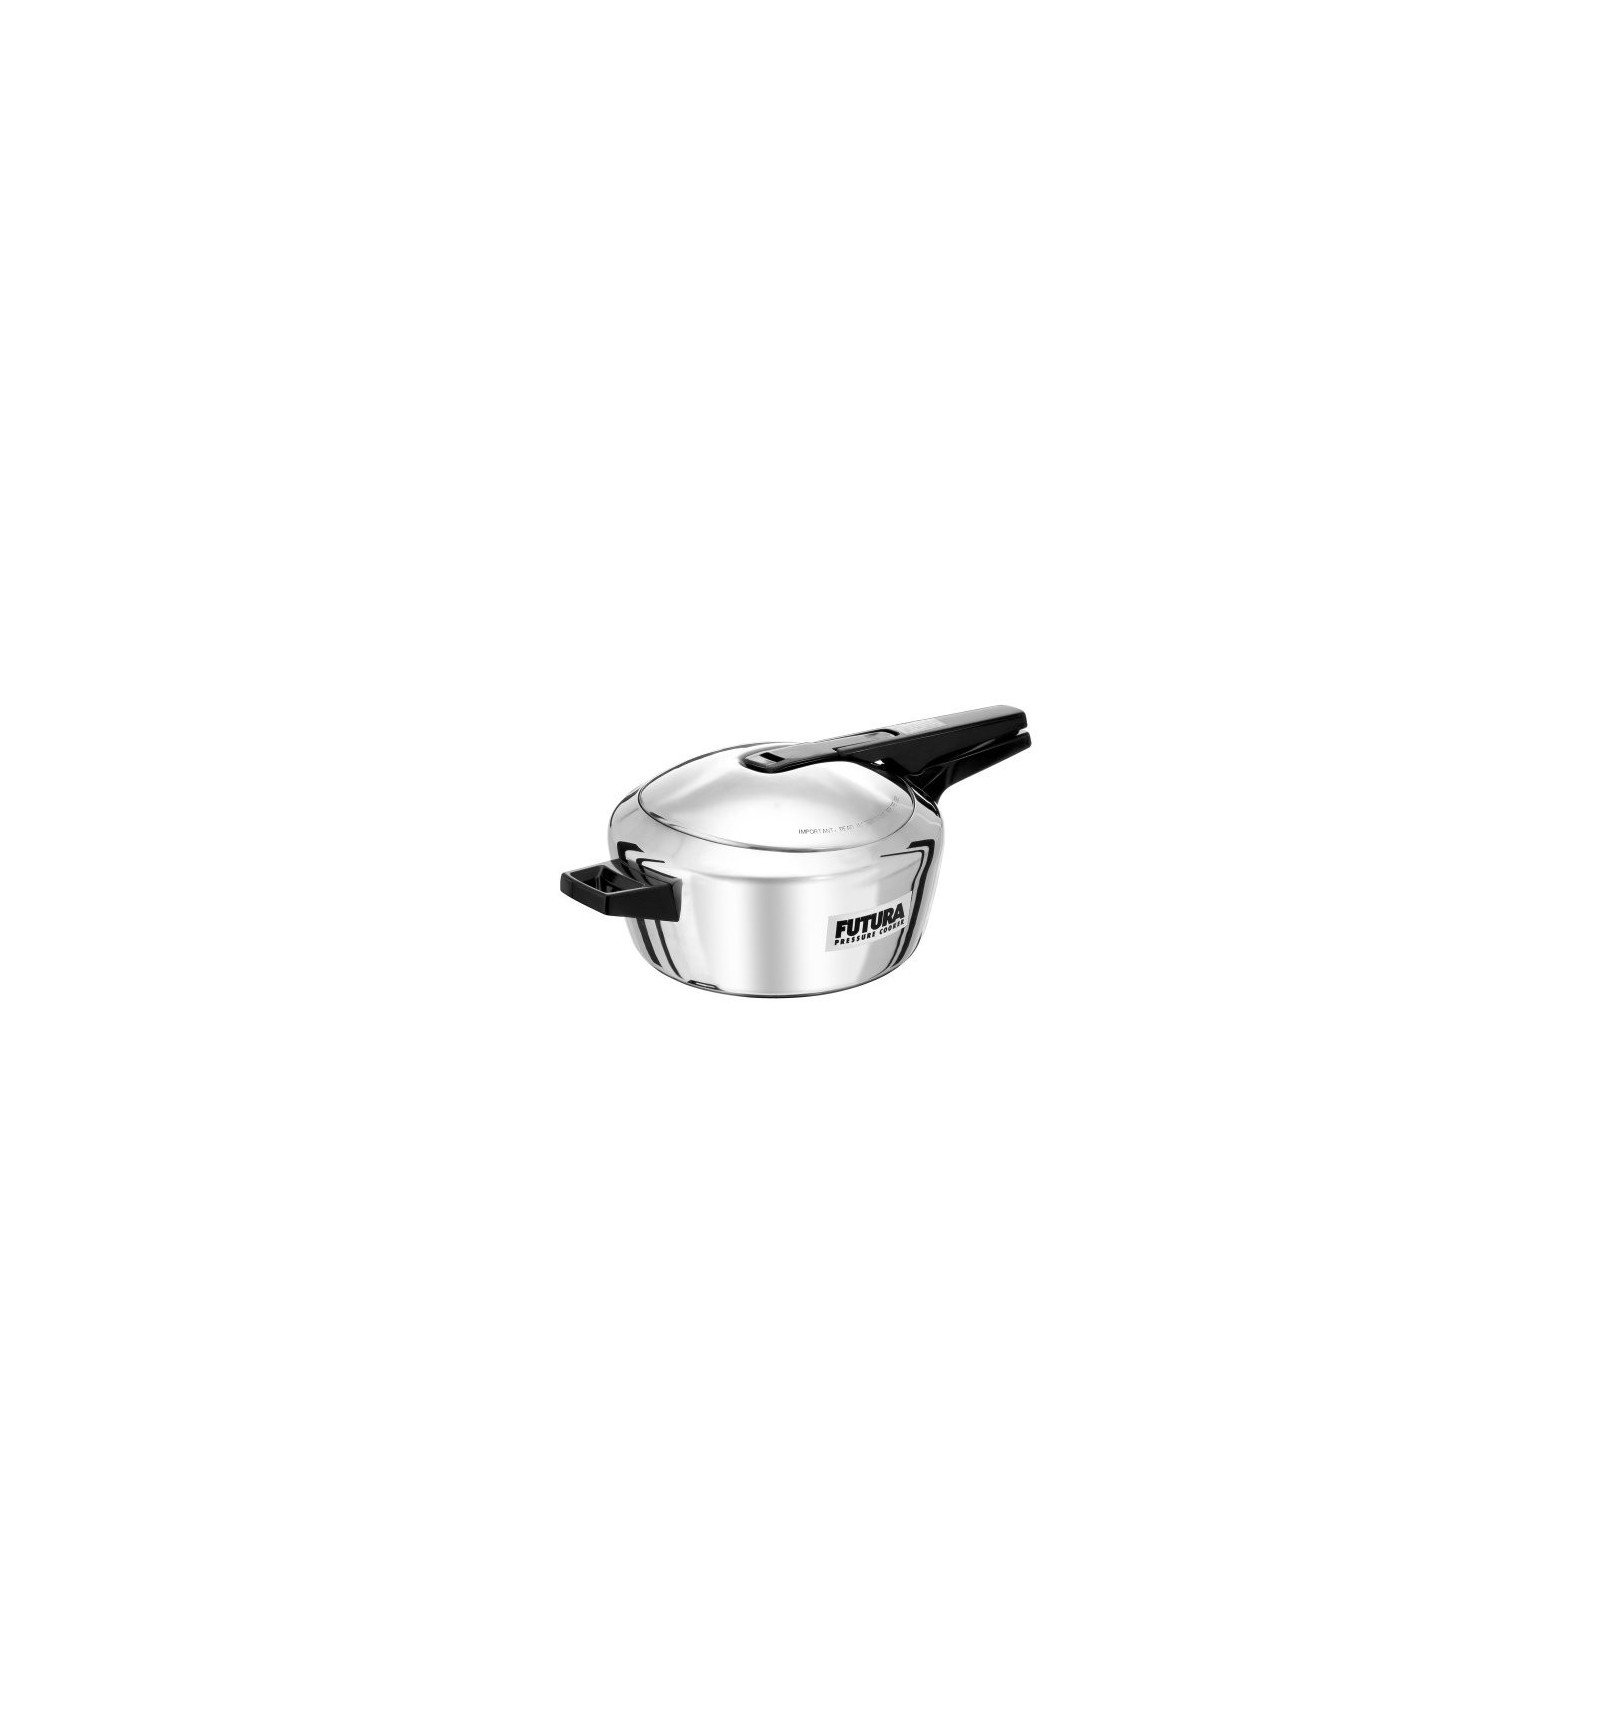 Hawkins-Futura F-41 Induction Compatible Pressure Cooker, 4-Liter,  Stainless Steel